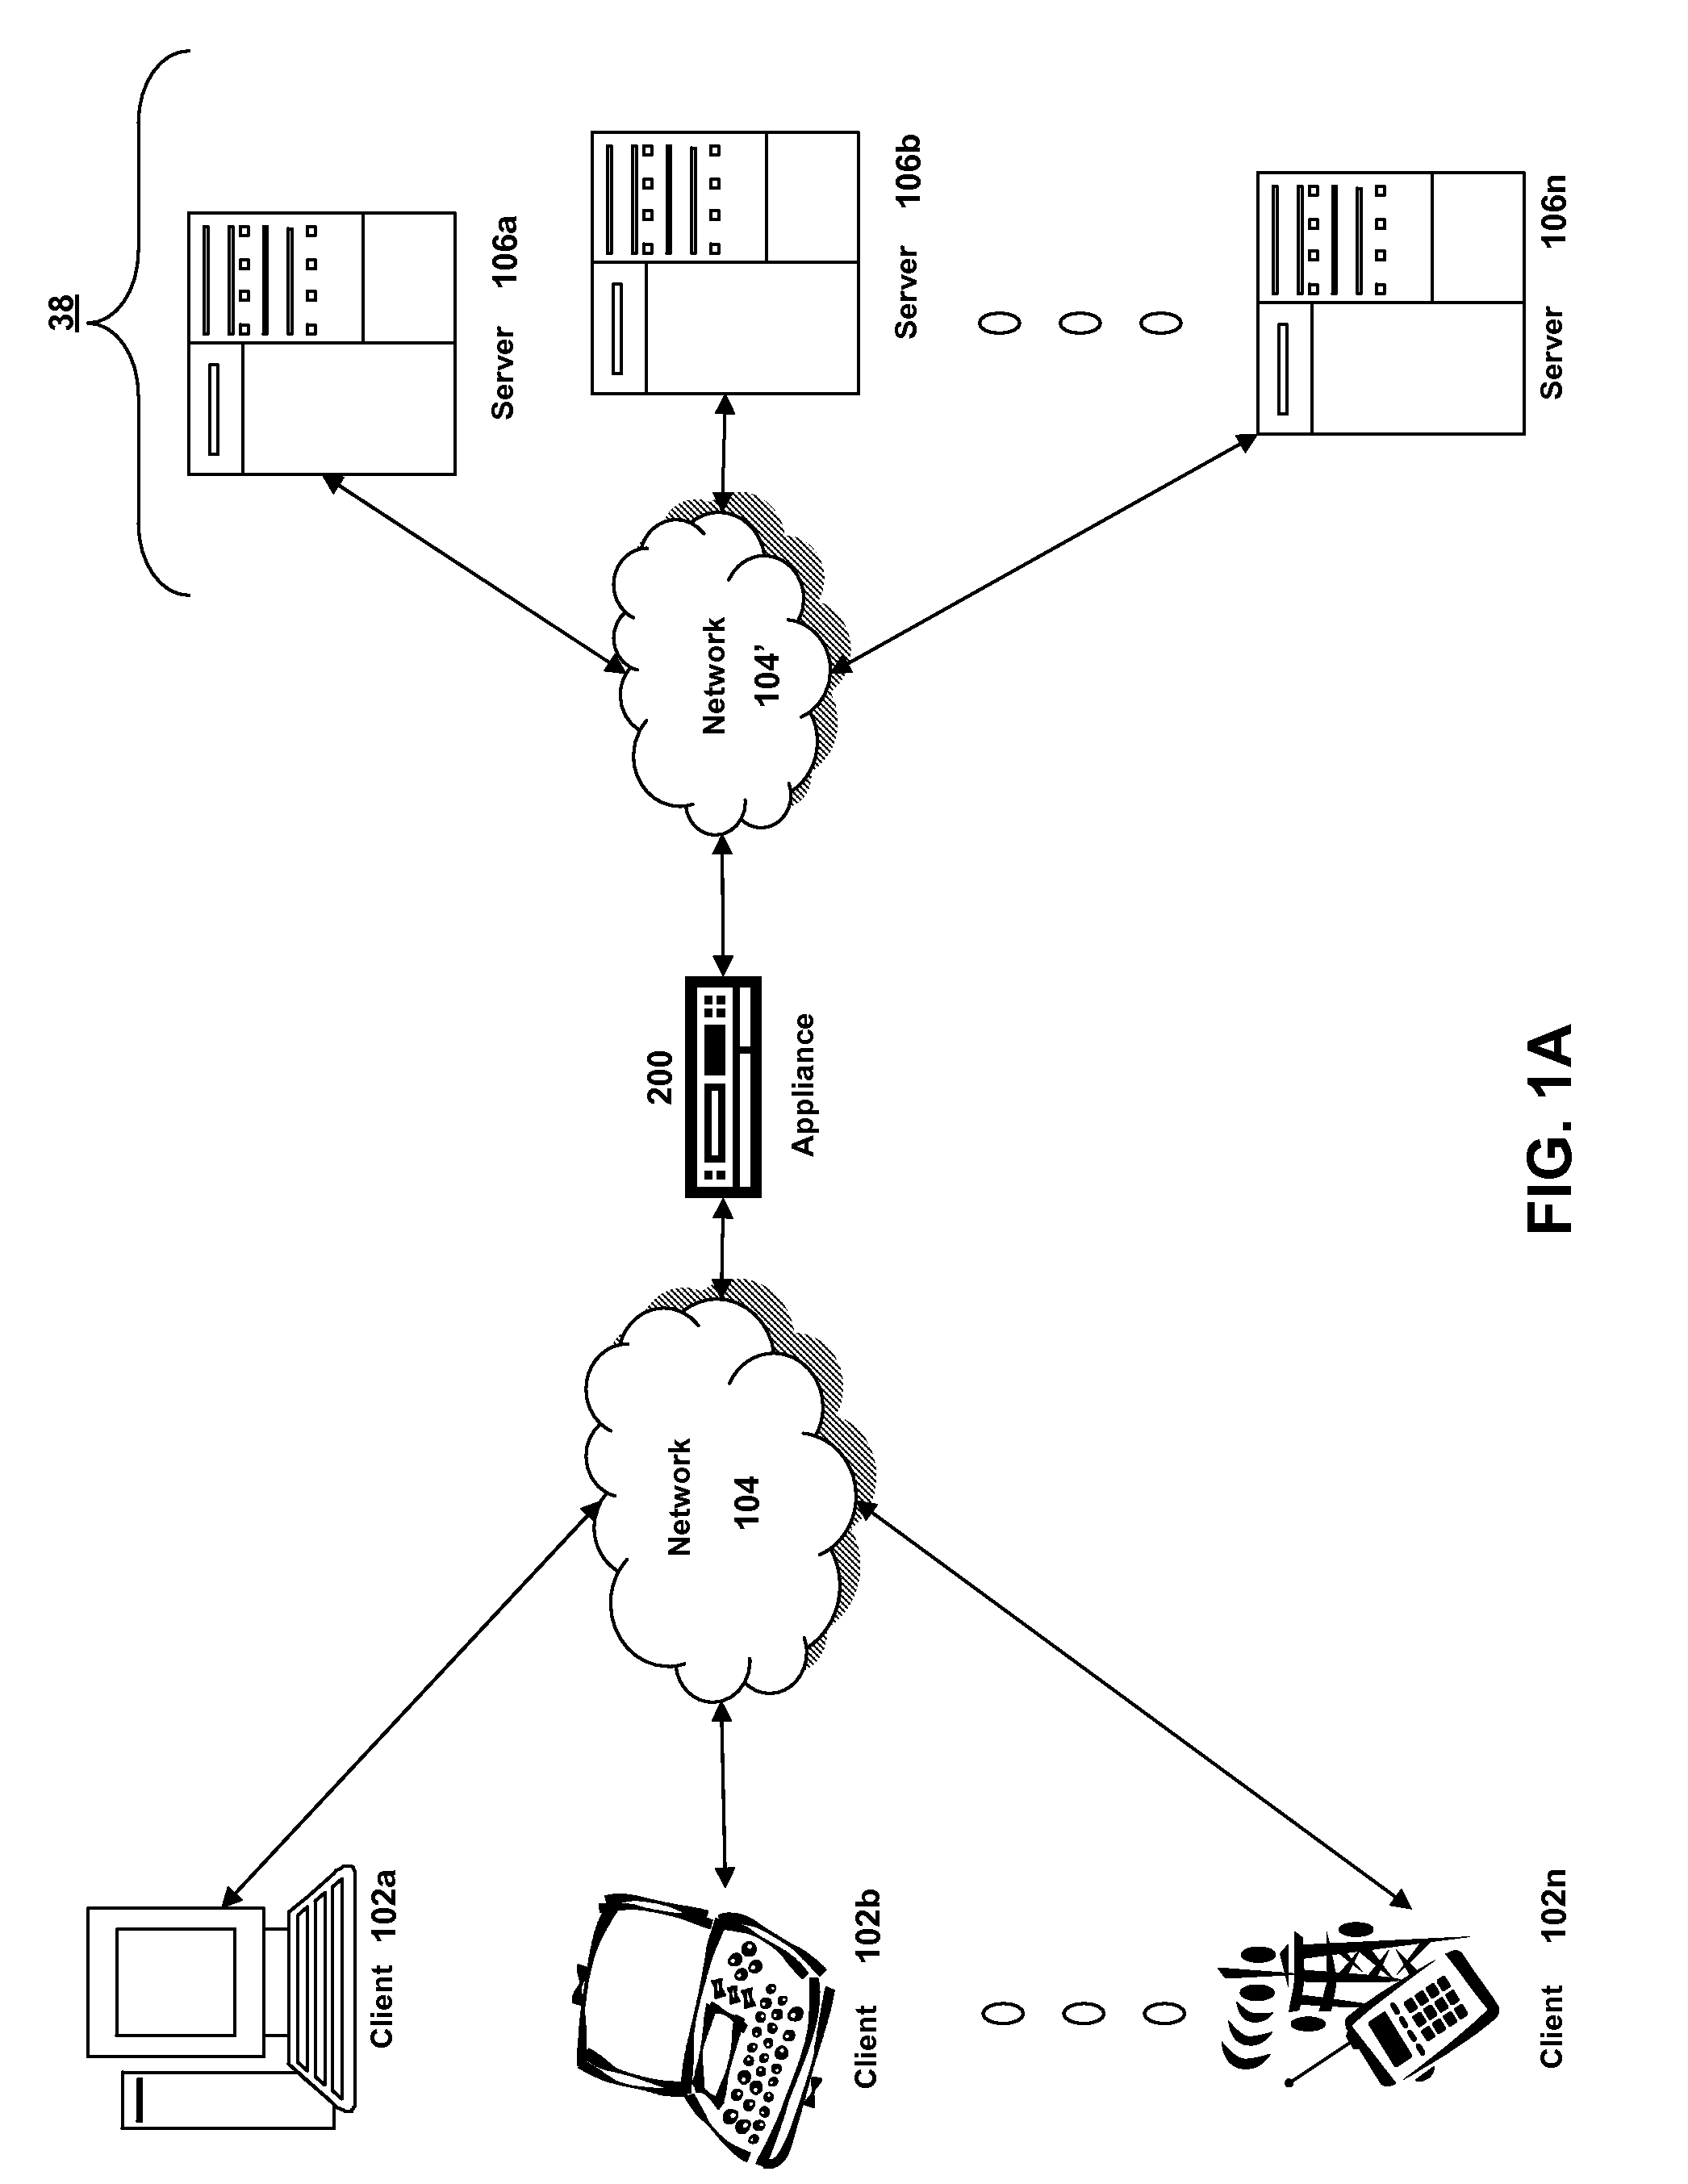 Systems and methods for configuring flow control of policy expressions